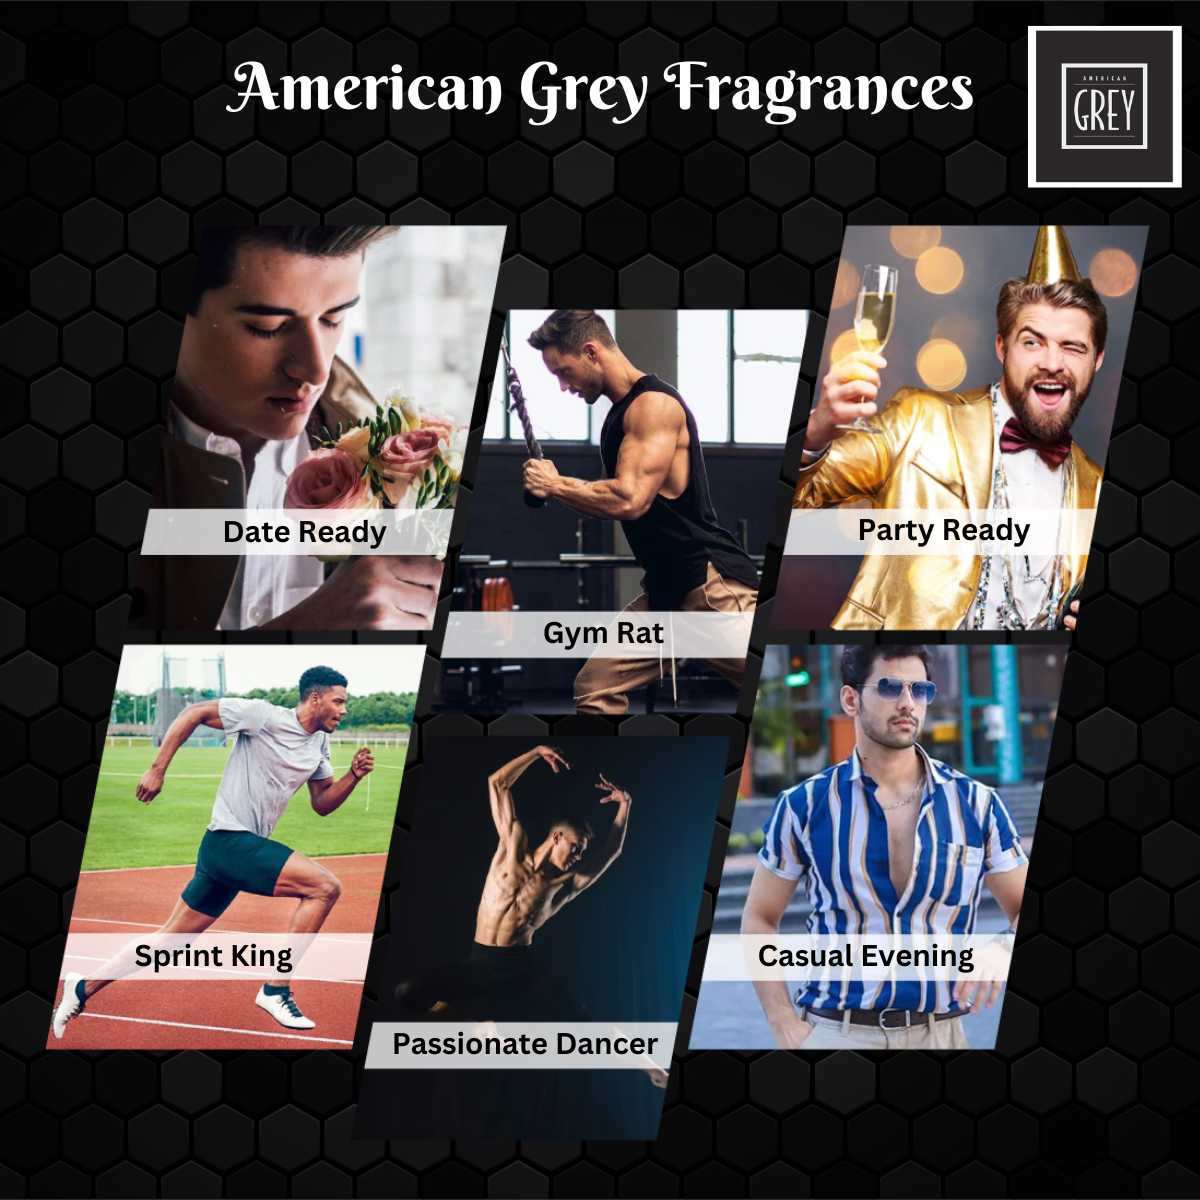 be date ready with american grey perfume spray, be party ready with american grey perfume spray, grooming routine for men, best party deo, best gym deo, long lasting deo for casual evenings, can I use deodorant anytime, when can u wear a deodorant, can I wear a deo in morning, best time to apply deo, best time to apply american grey deo, american grey deo, top men deo brand in india, fruity smelling deo,  top rated mens deo, men grooming essential, men fragrance for summer season, best deo for hot weather, popular summer deodorant for men, best deo for summer season, best deo for summer season, casual evening wear for men